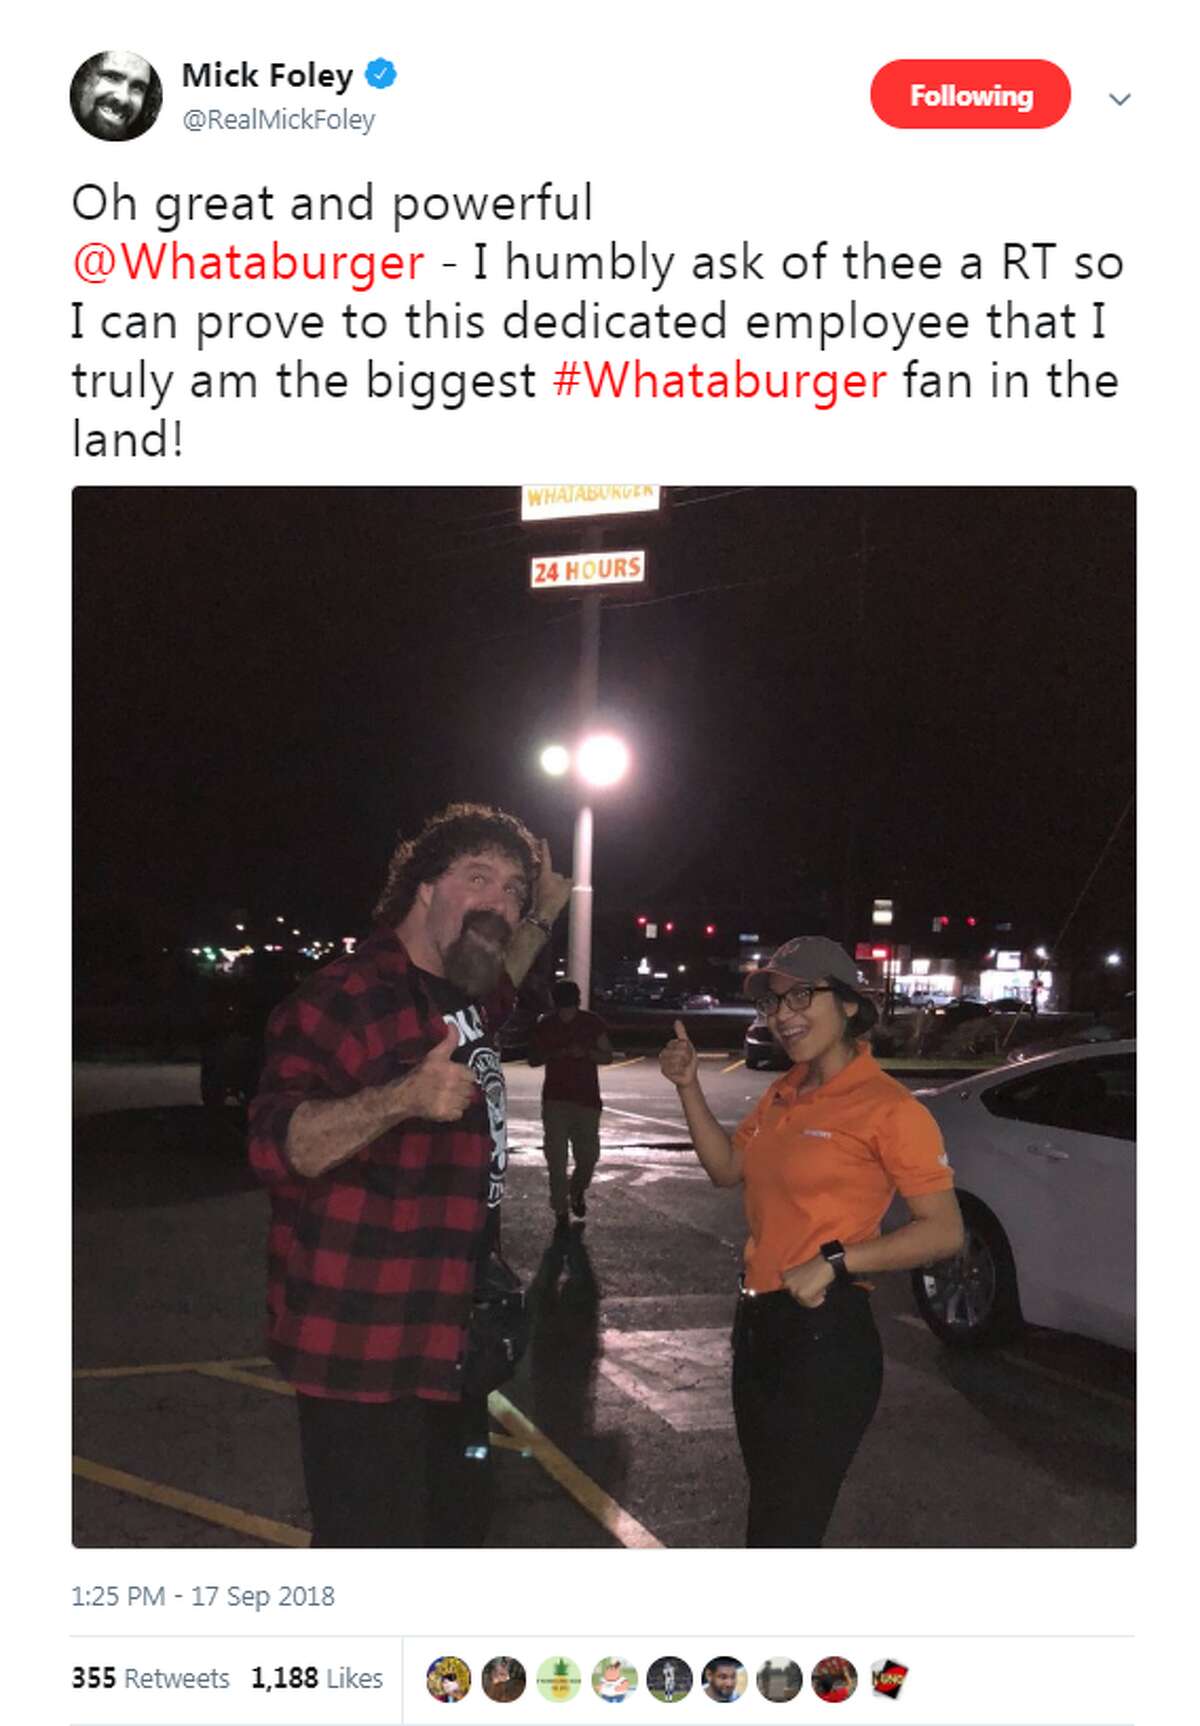 @RealMickFoley: Oh great and powerful @Whataburger - I humbly ask of thee a RT so I can prove to this dedicated employee that I truly am the biggest #Whataburger fan in the land!